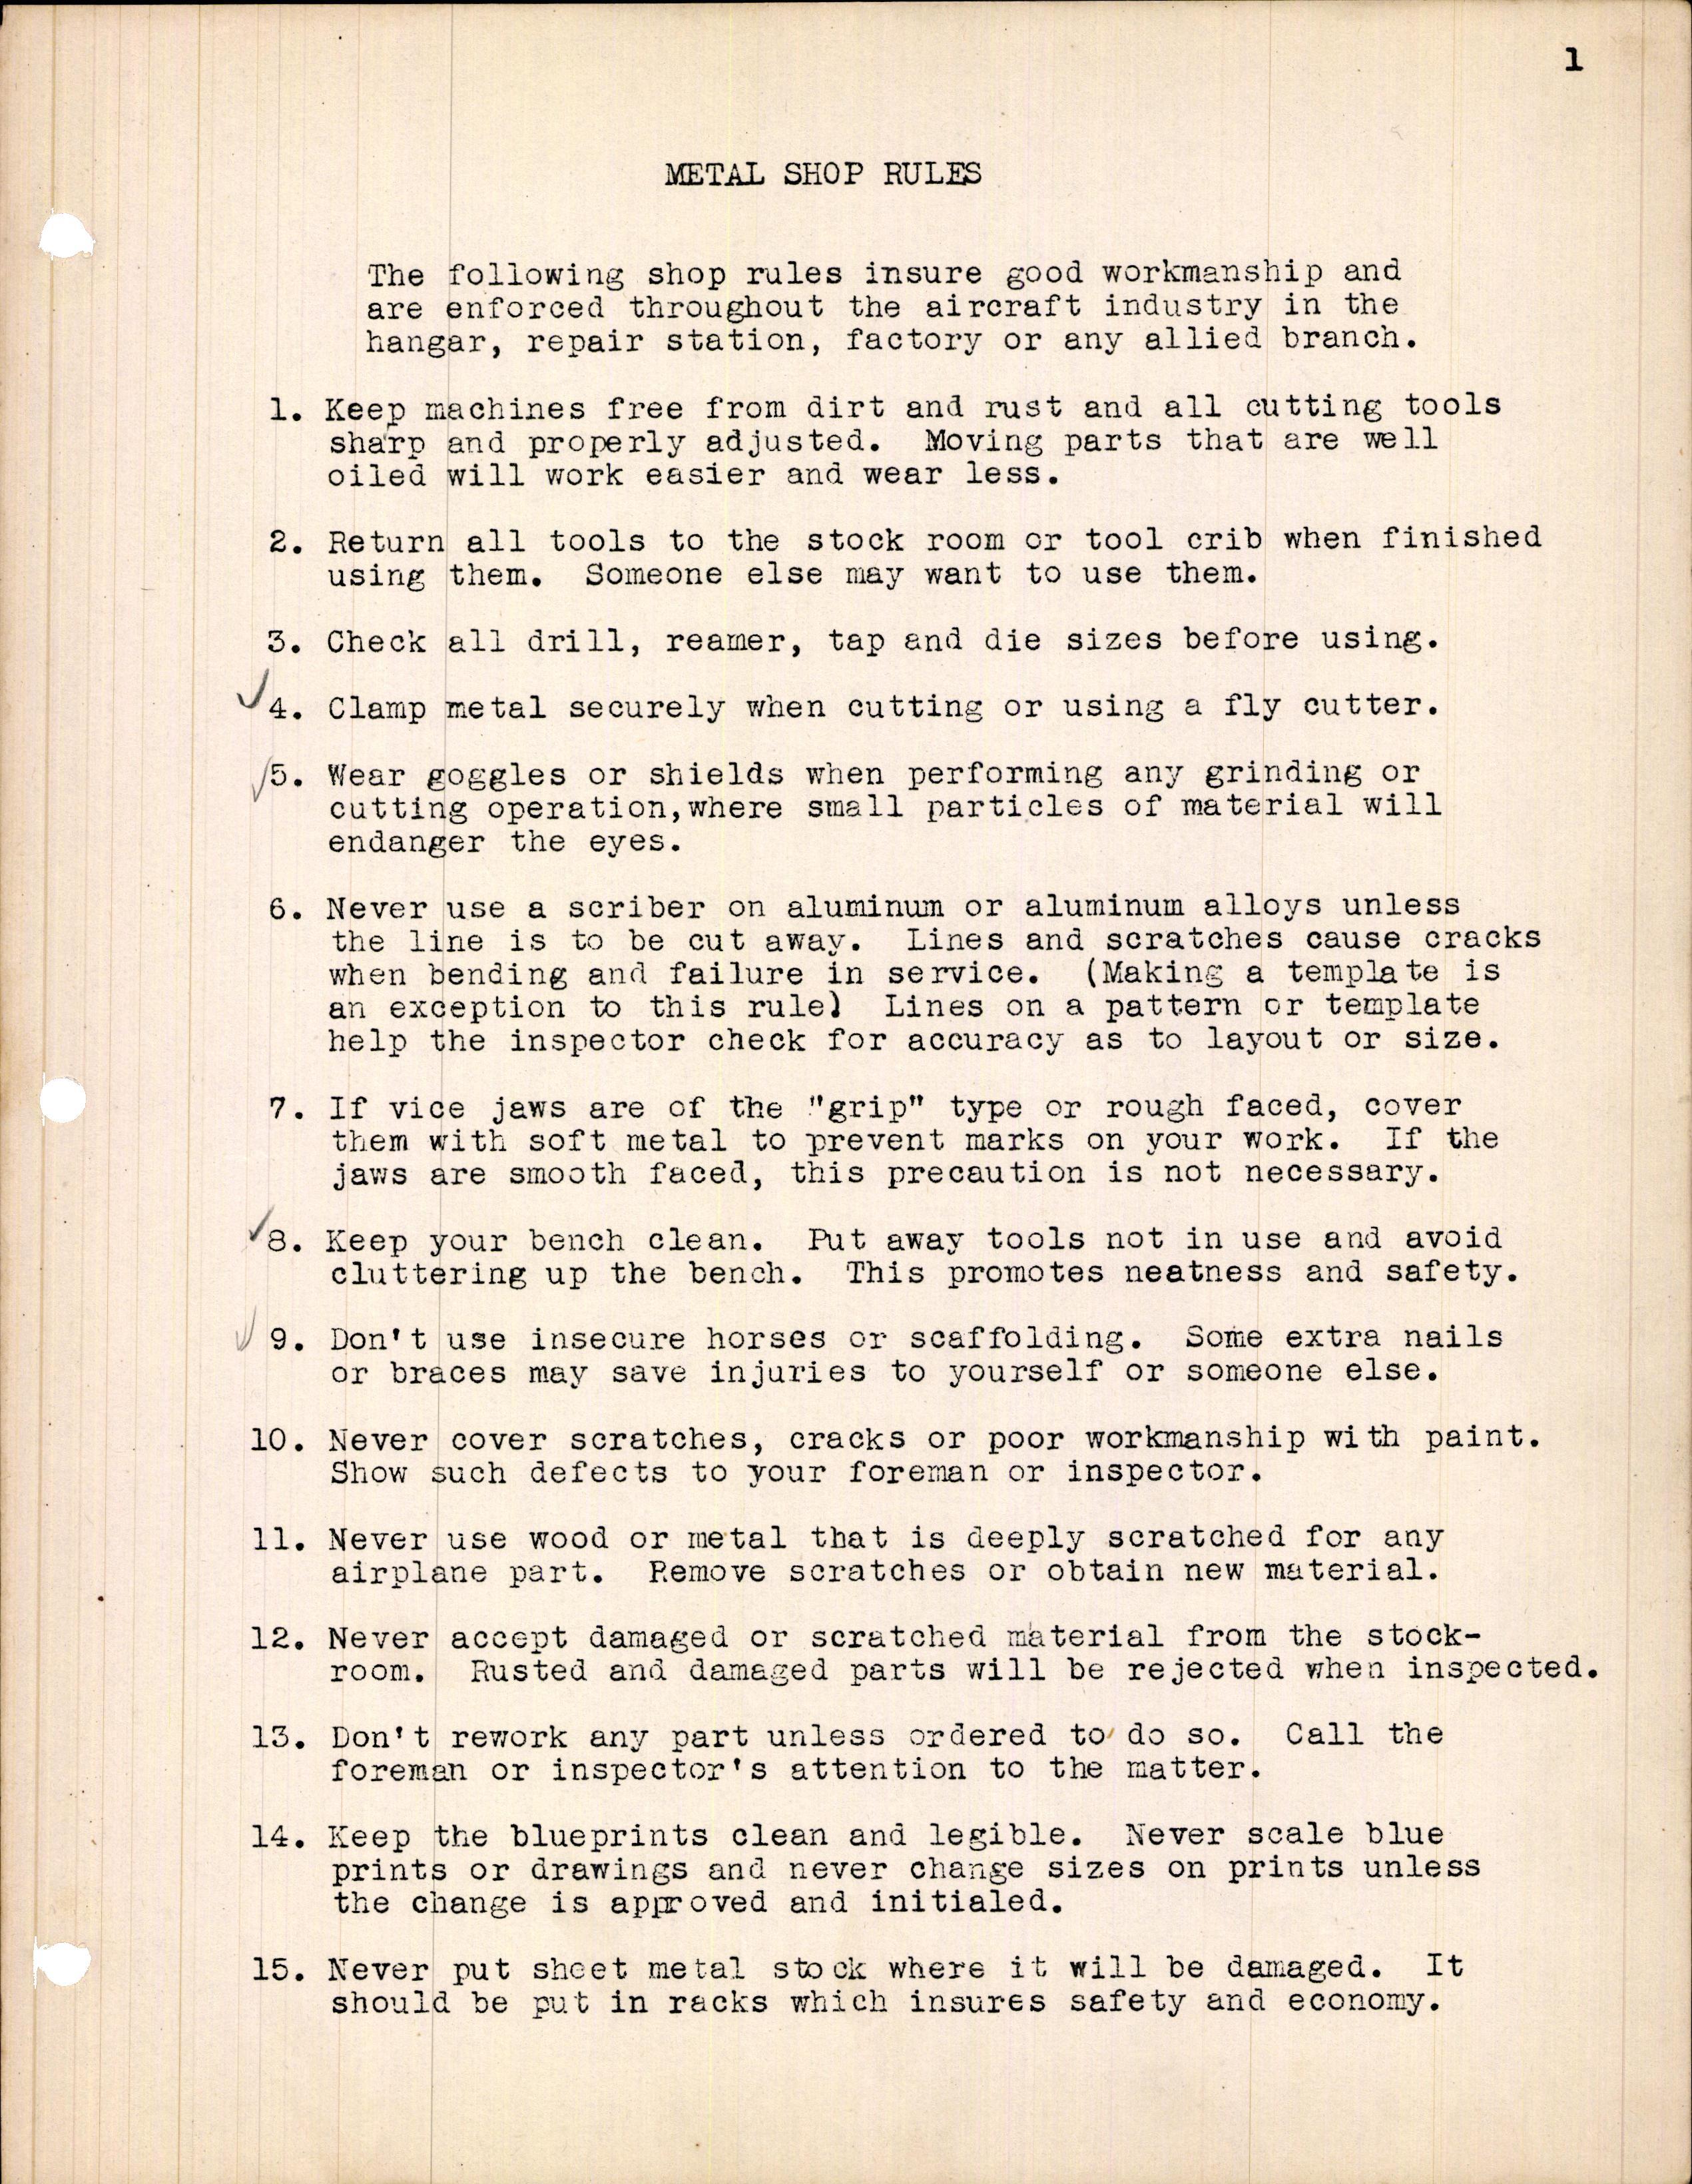 Sample page 3 from AirCorps Library document: Casey Jones School of Aeronautics - Primary Metalworks